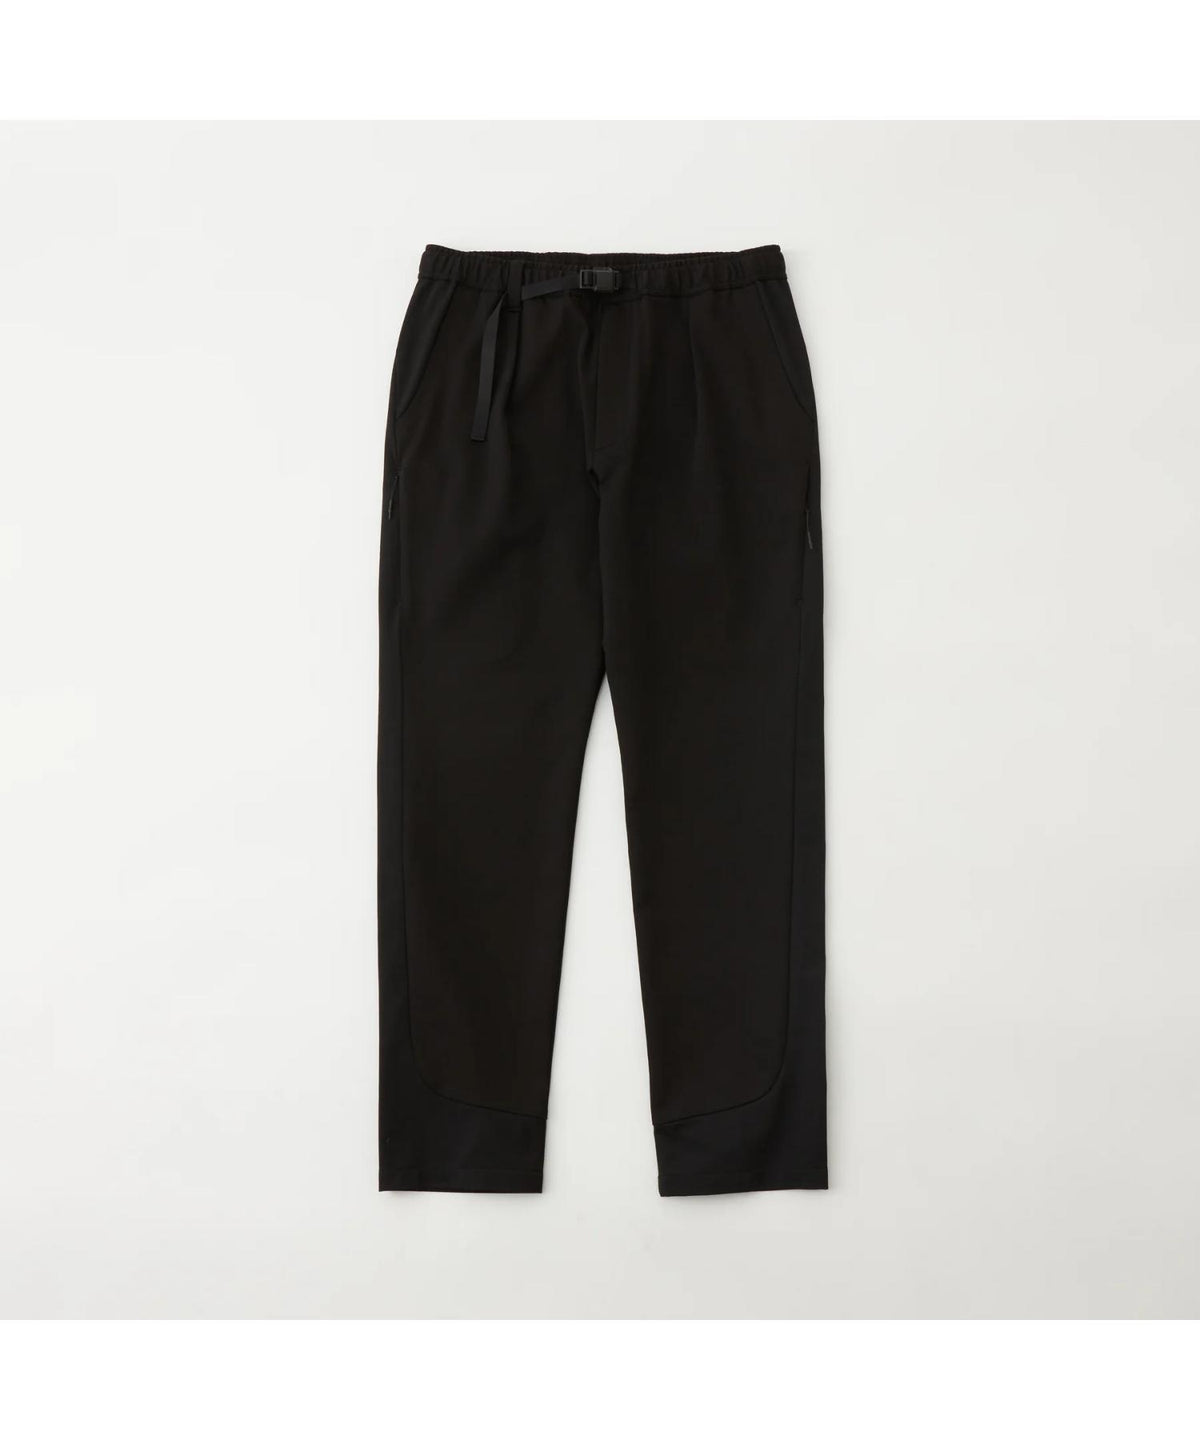 TAPERED EASY PANTS